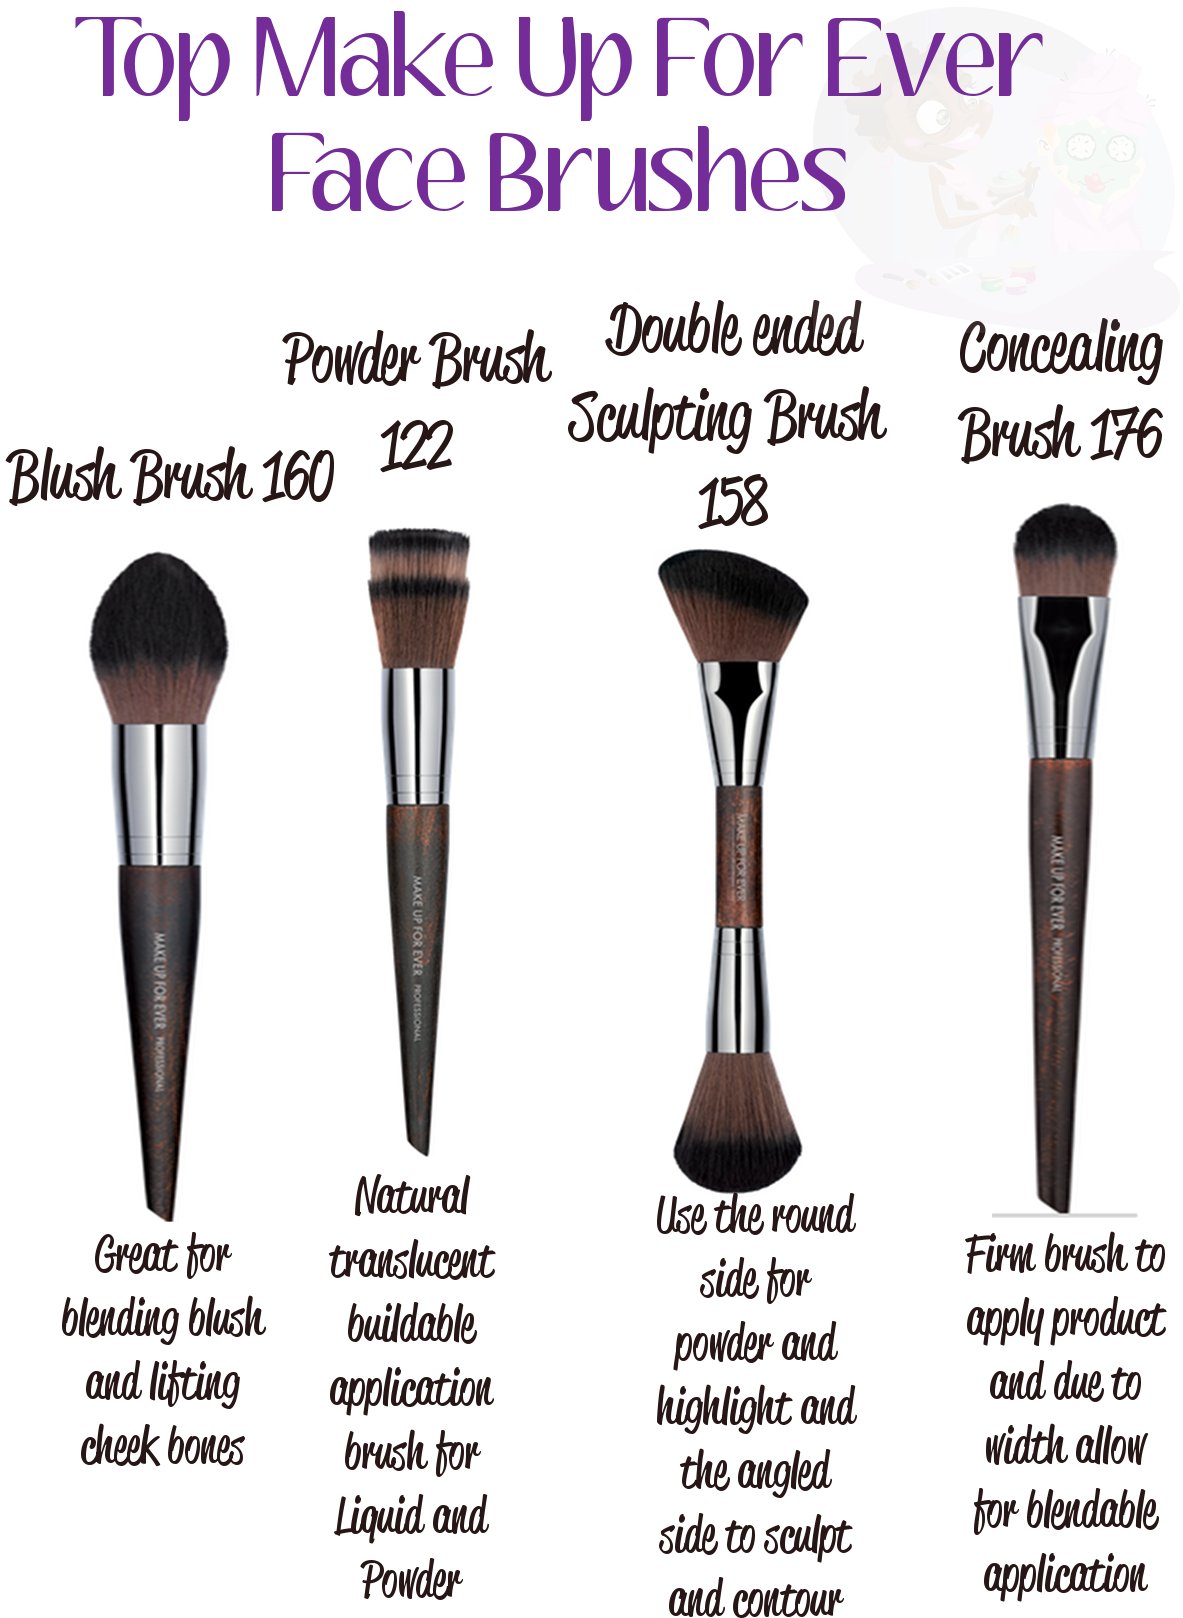 Top Make Up For Ever Face Brushes